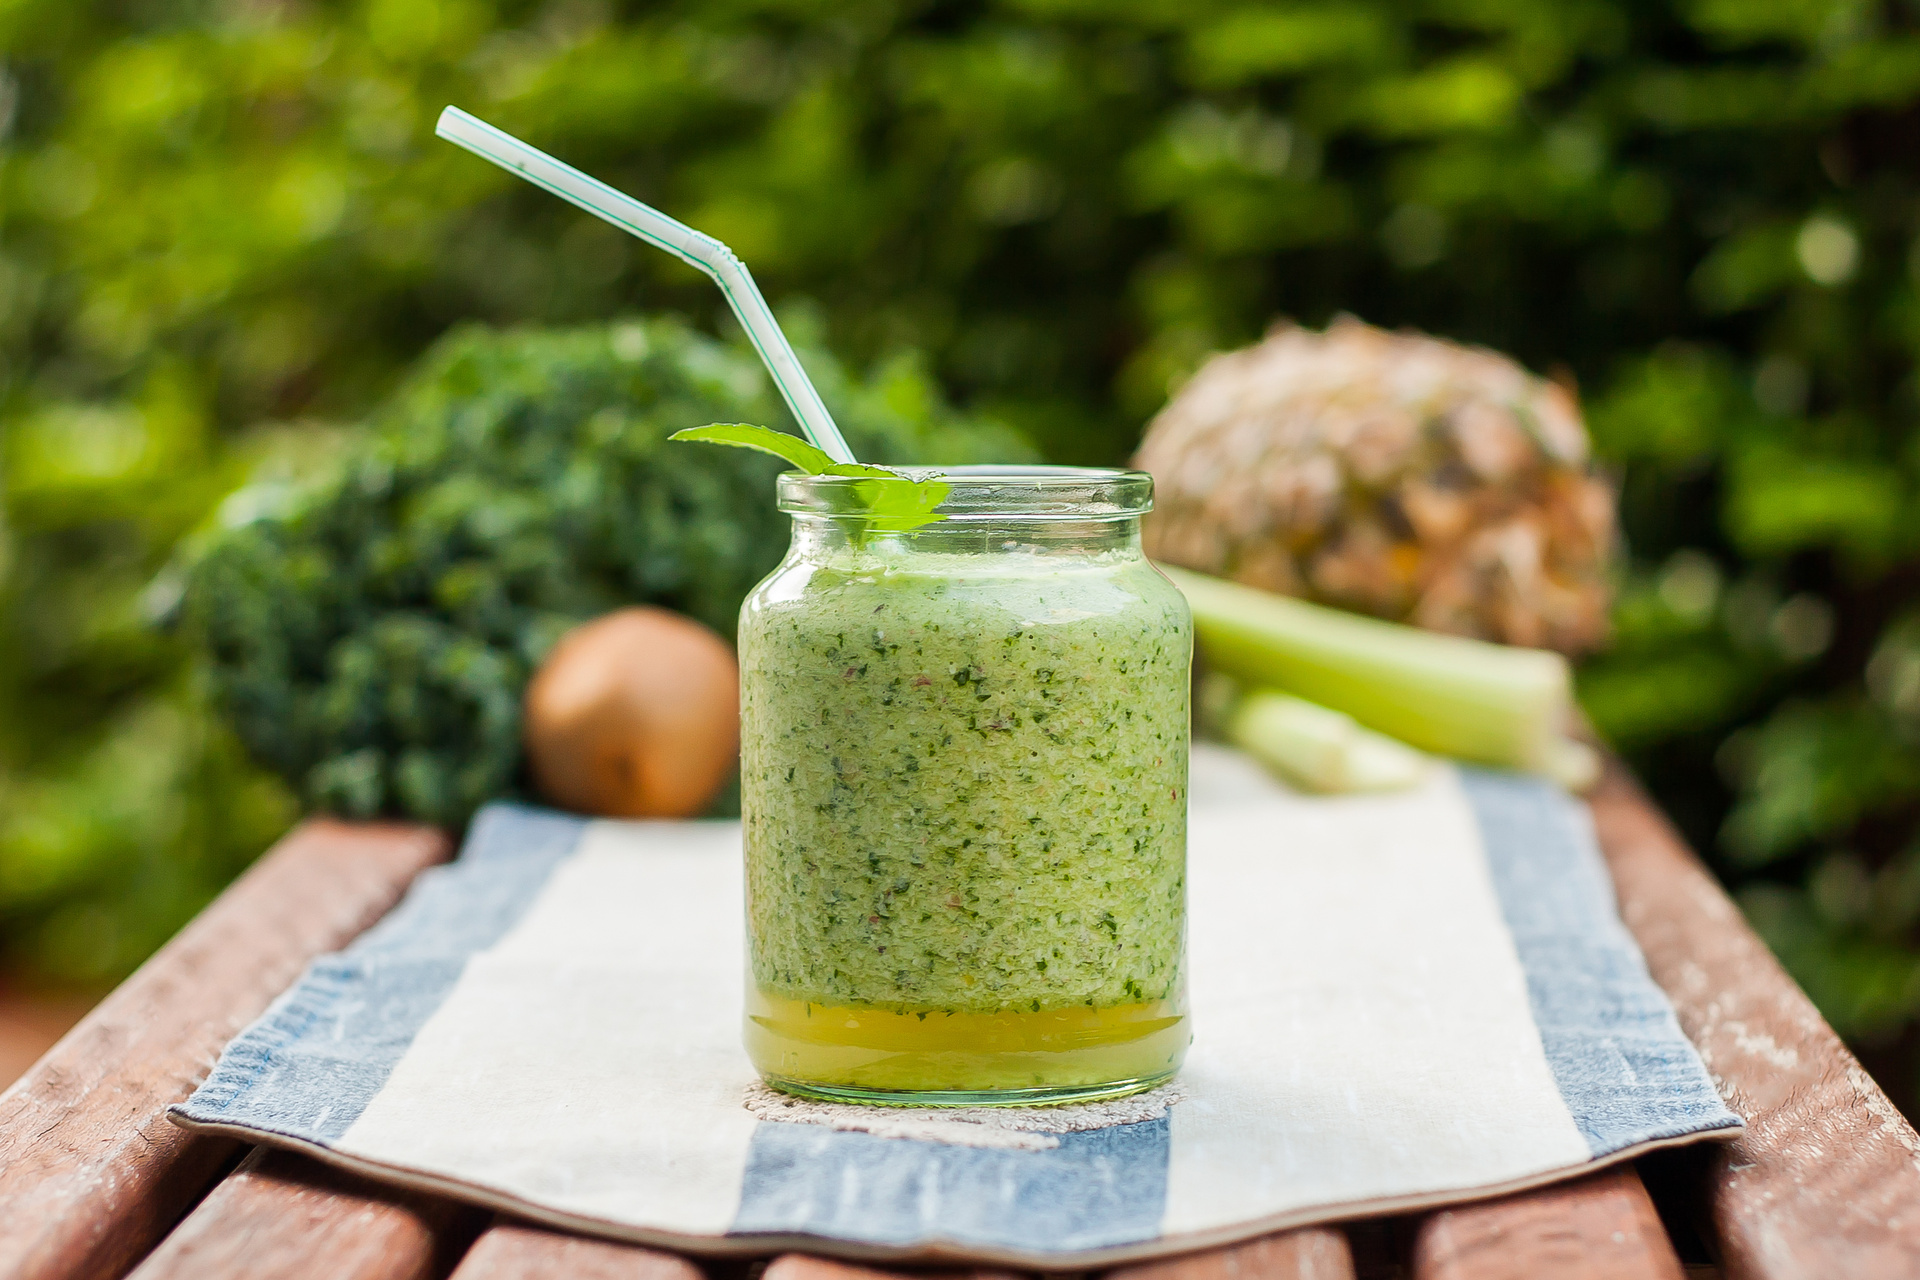 Kale Pineapple Smoothie for Losing Weight